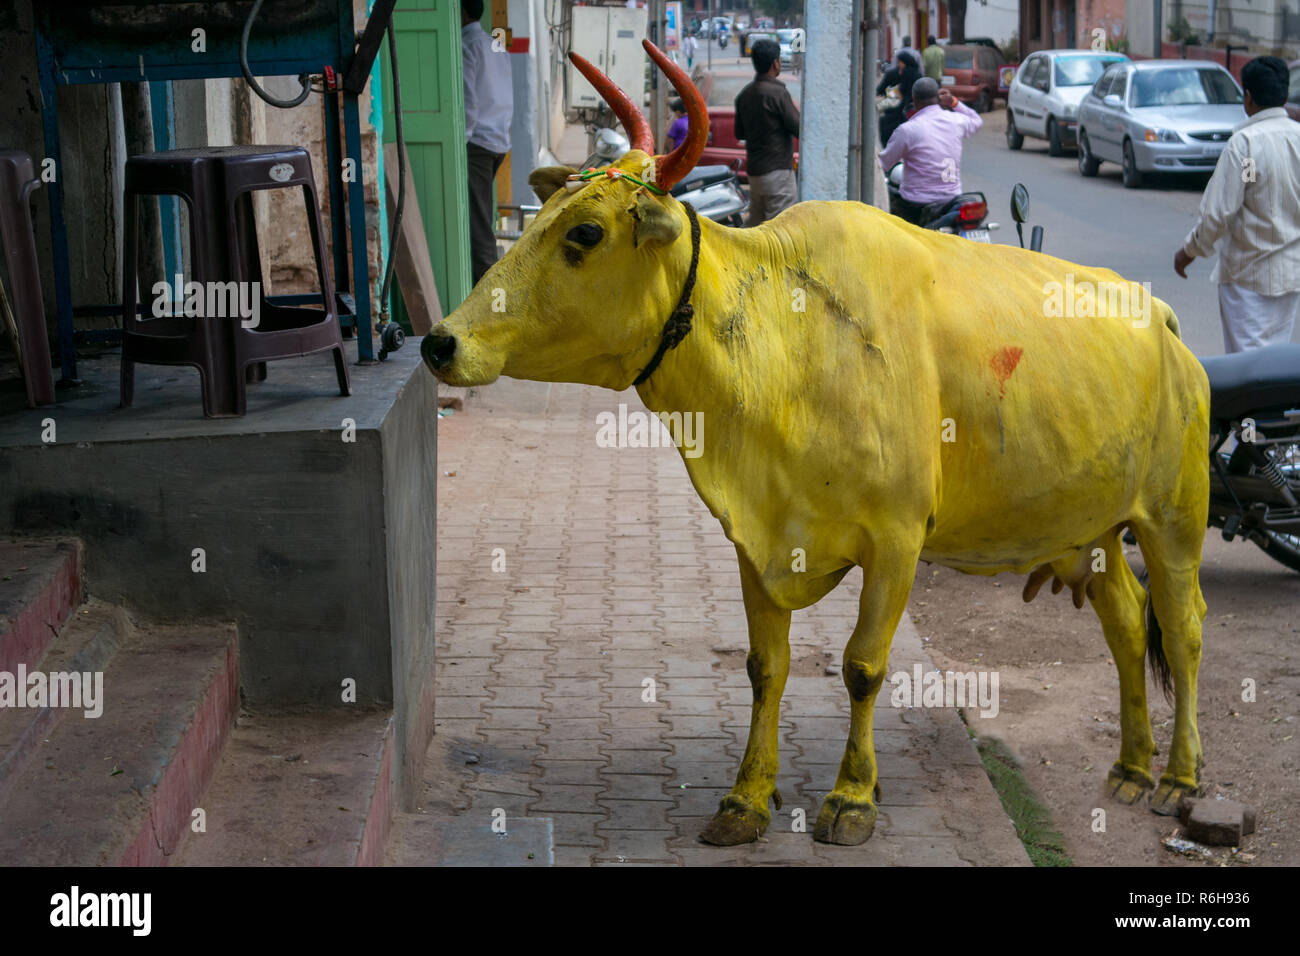 A sacred cow painted yellow during the indian holi colour festival wonders a street in india. Stock Photo